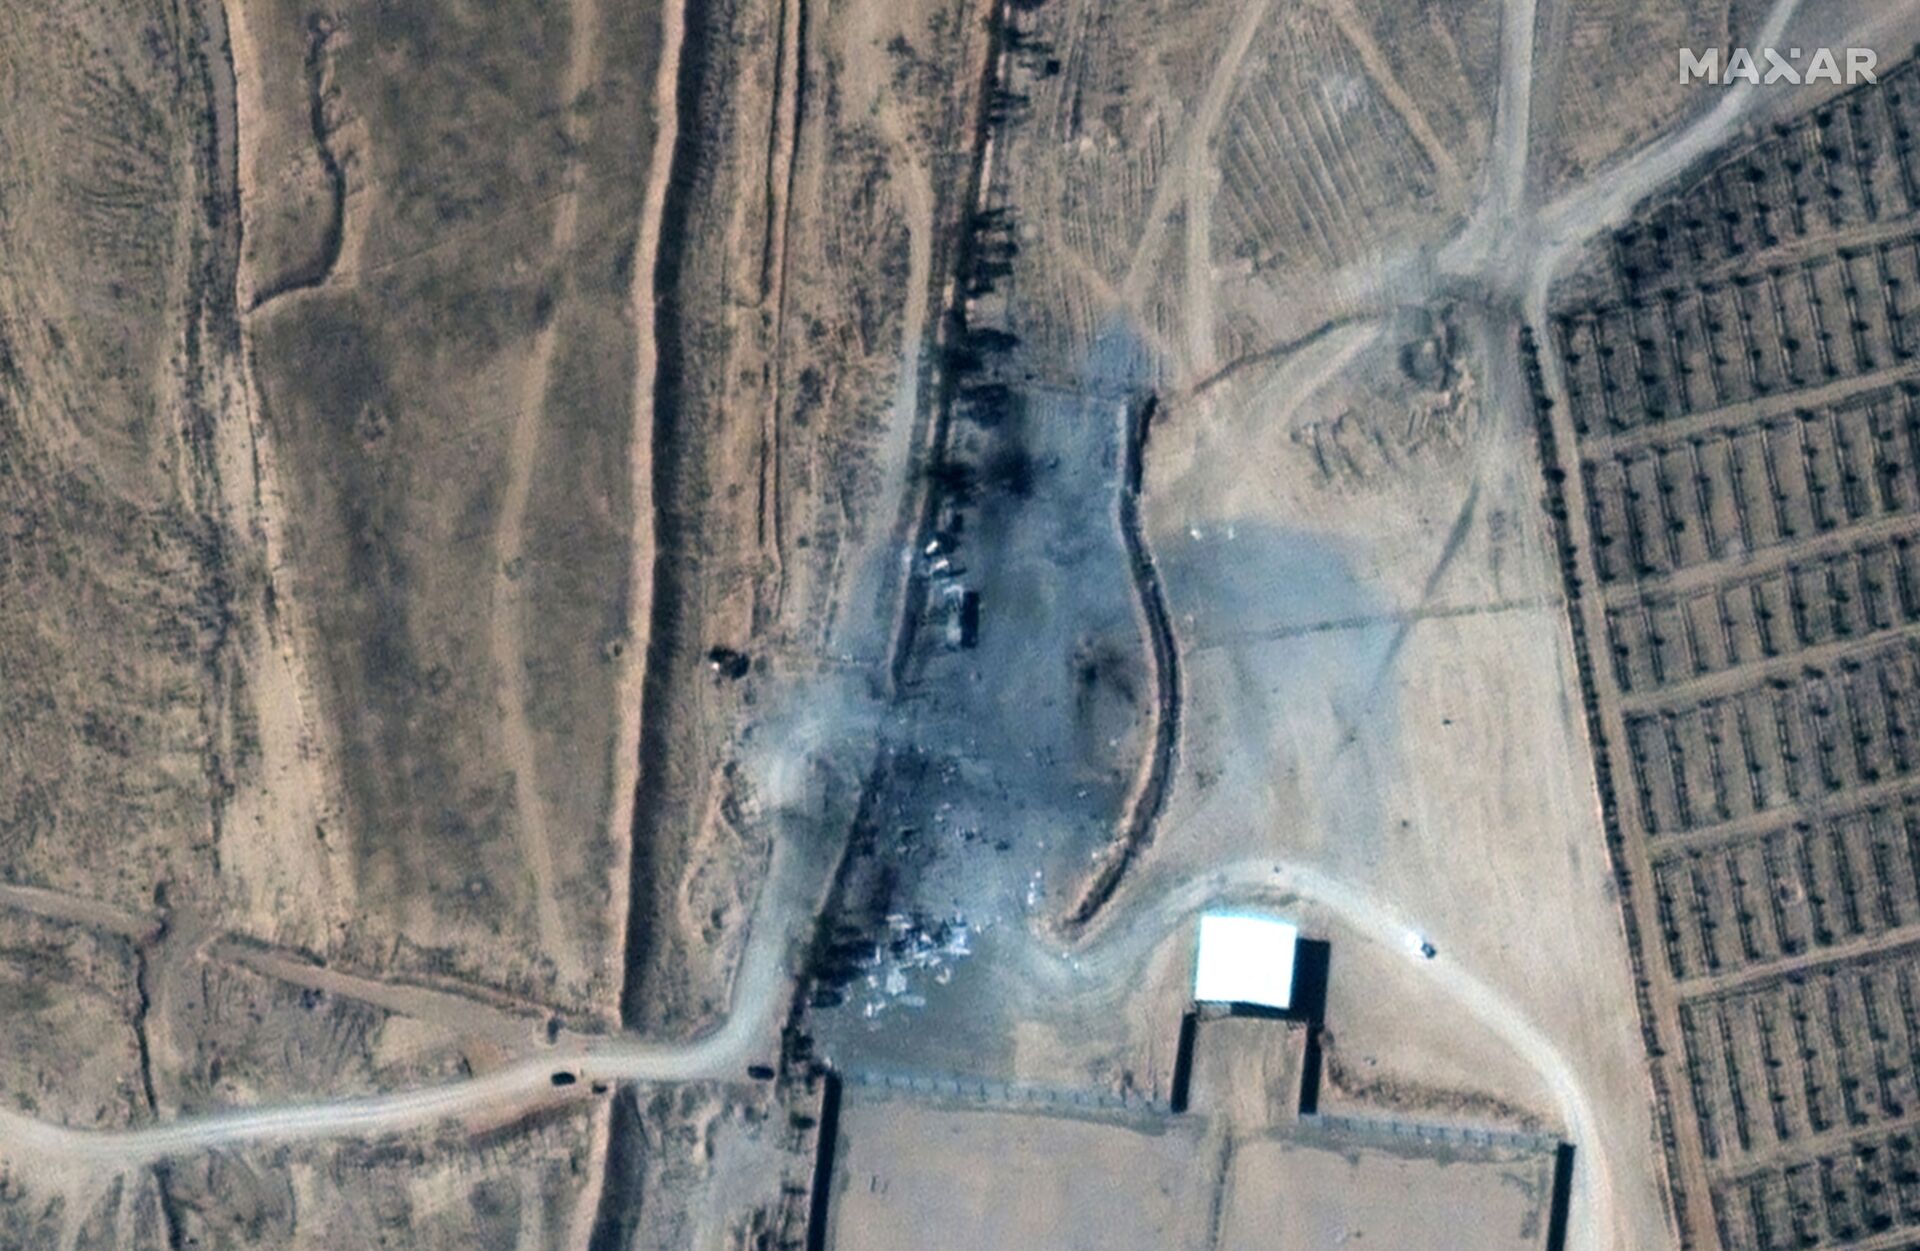 A close up view of destroyed buildings at an Iraq-Syria border crossing after airstrikes, seen in this February 26, 2021 handout satellite image provided by Maxar. - Sputnik International, 1920, 07.09.2021